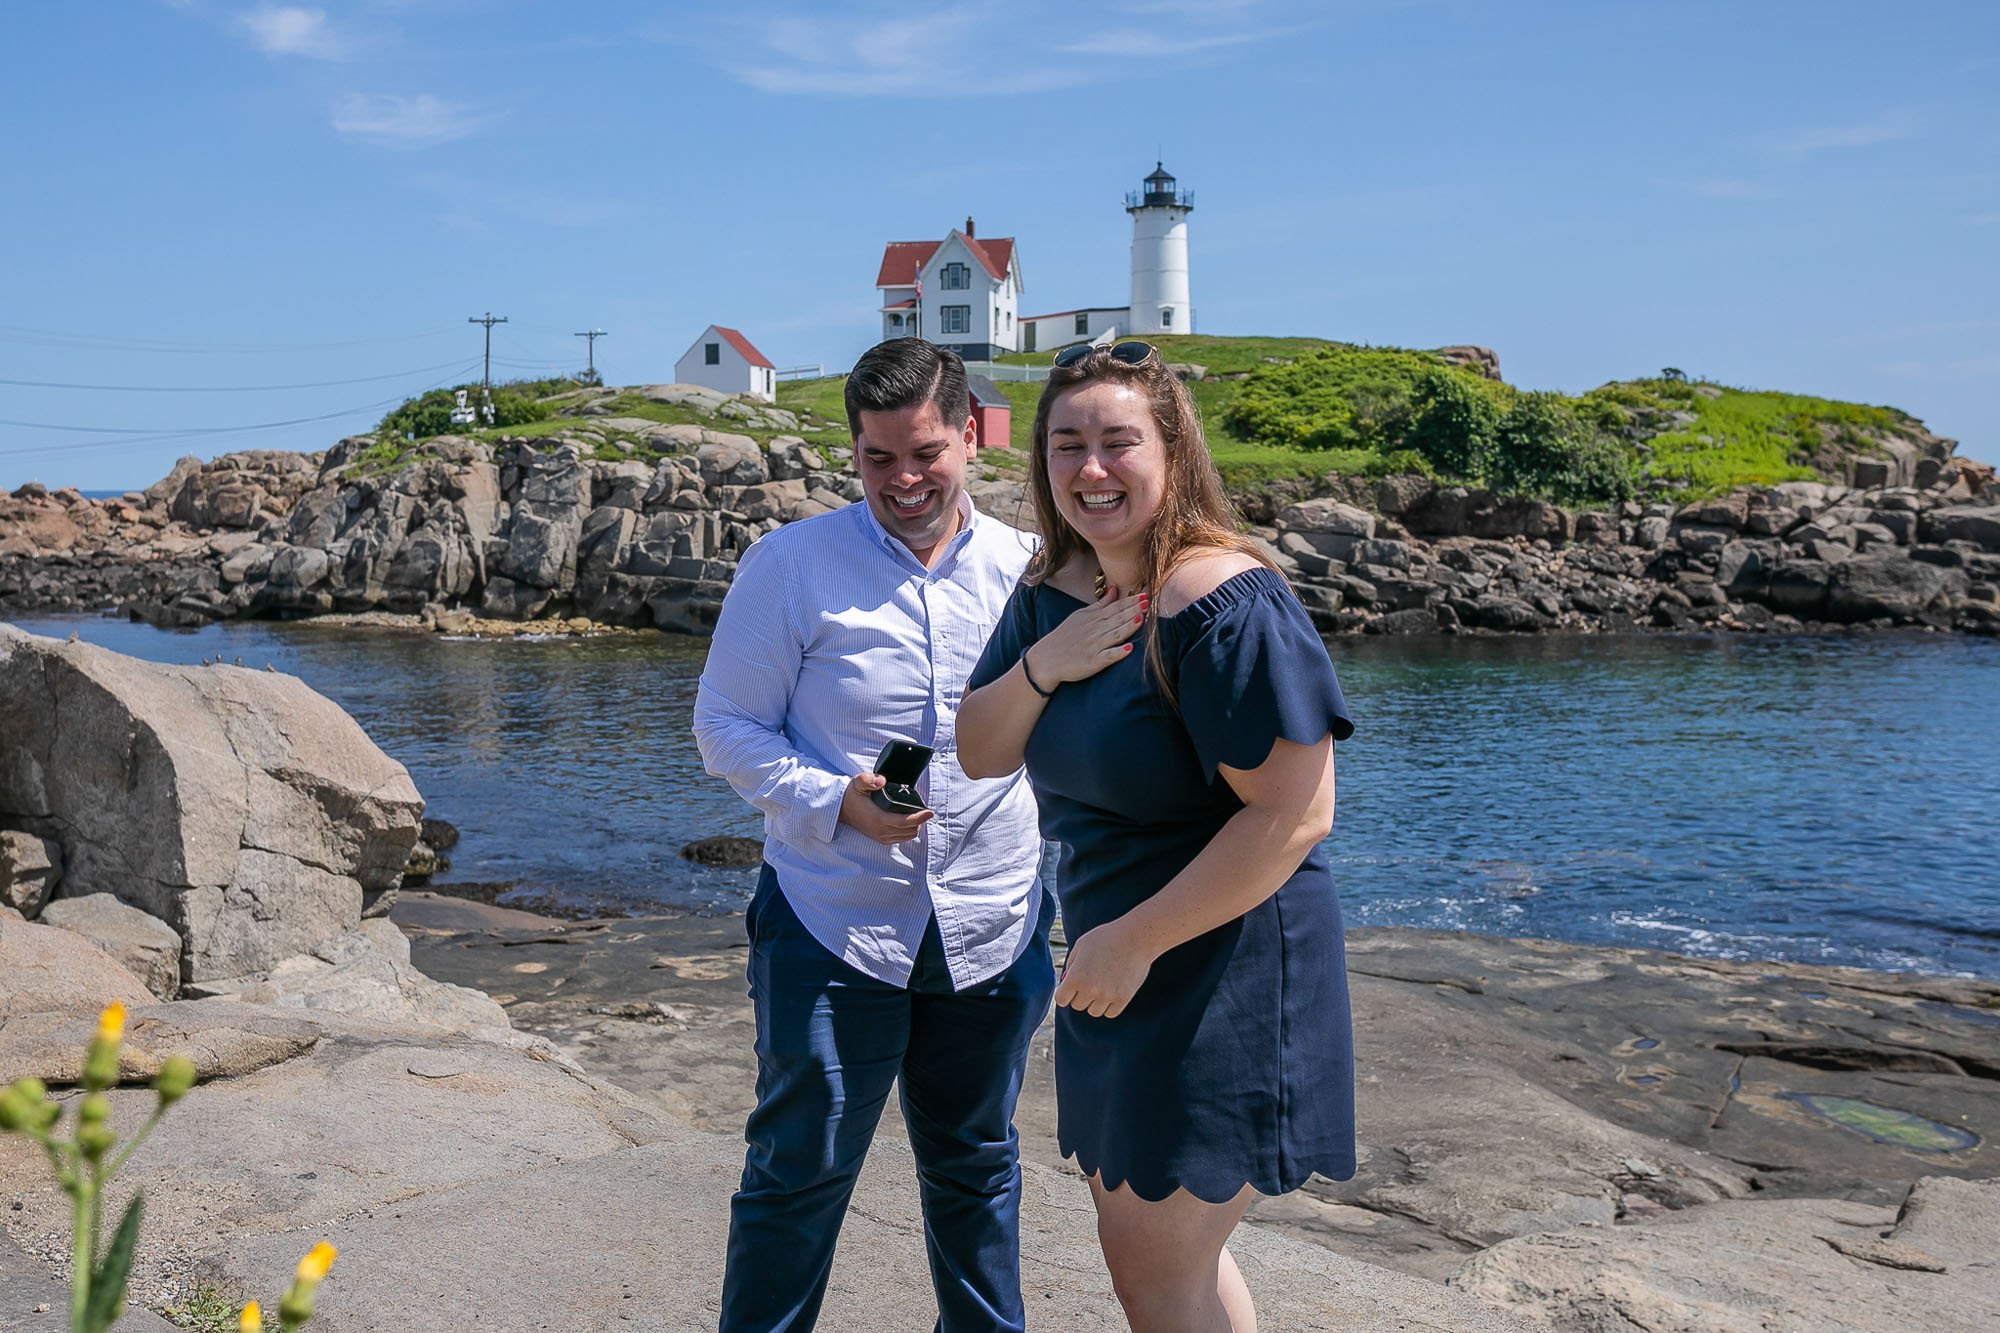 Surprise proposal and engagement session at Nubble Light in Maine.